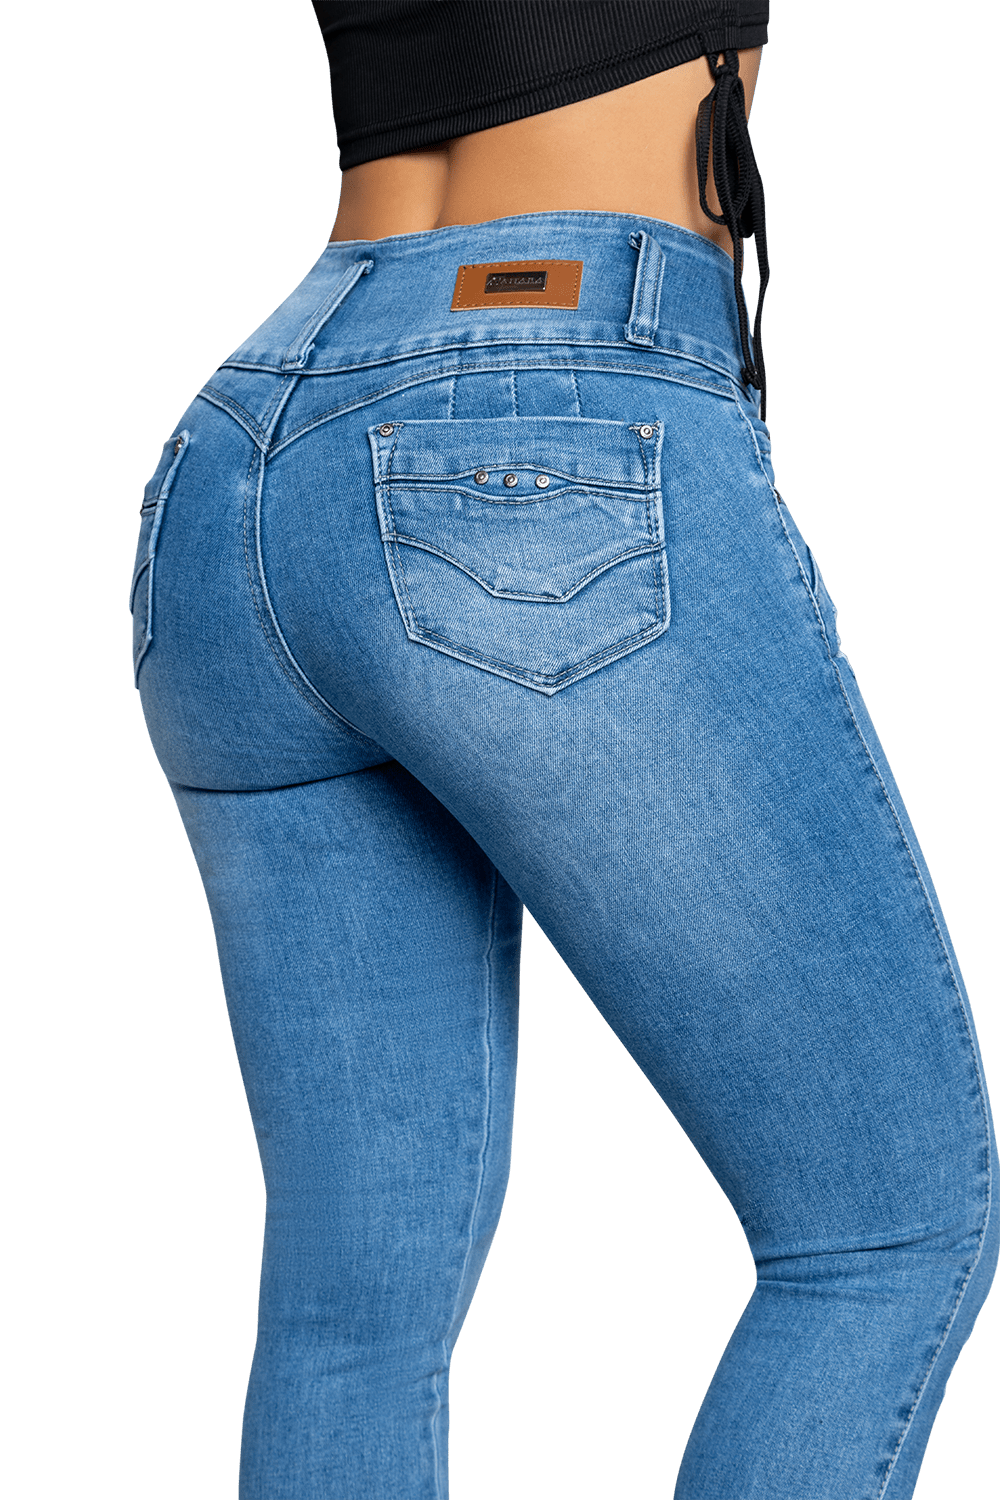 Ily Clothing Jeans Push Up Jean